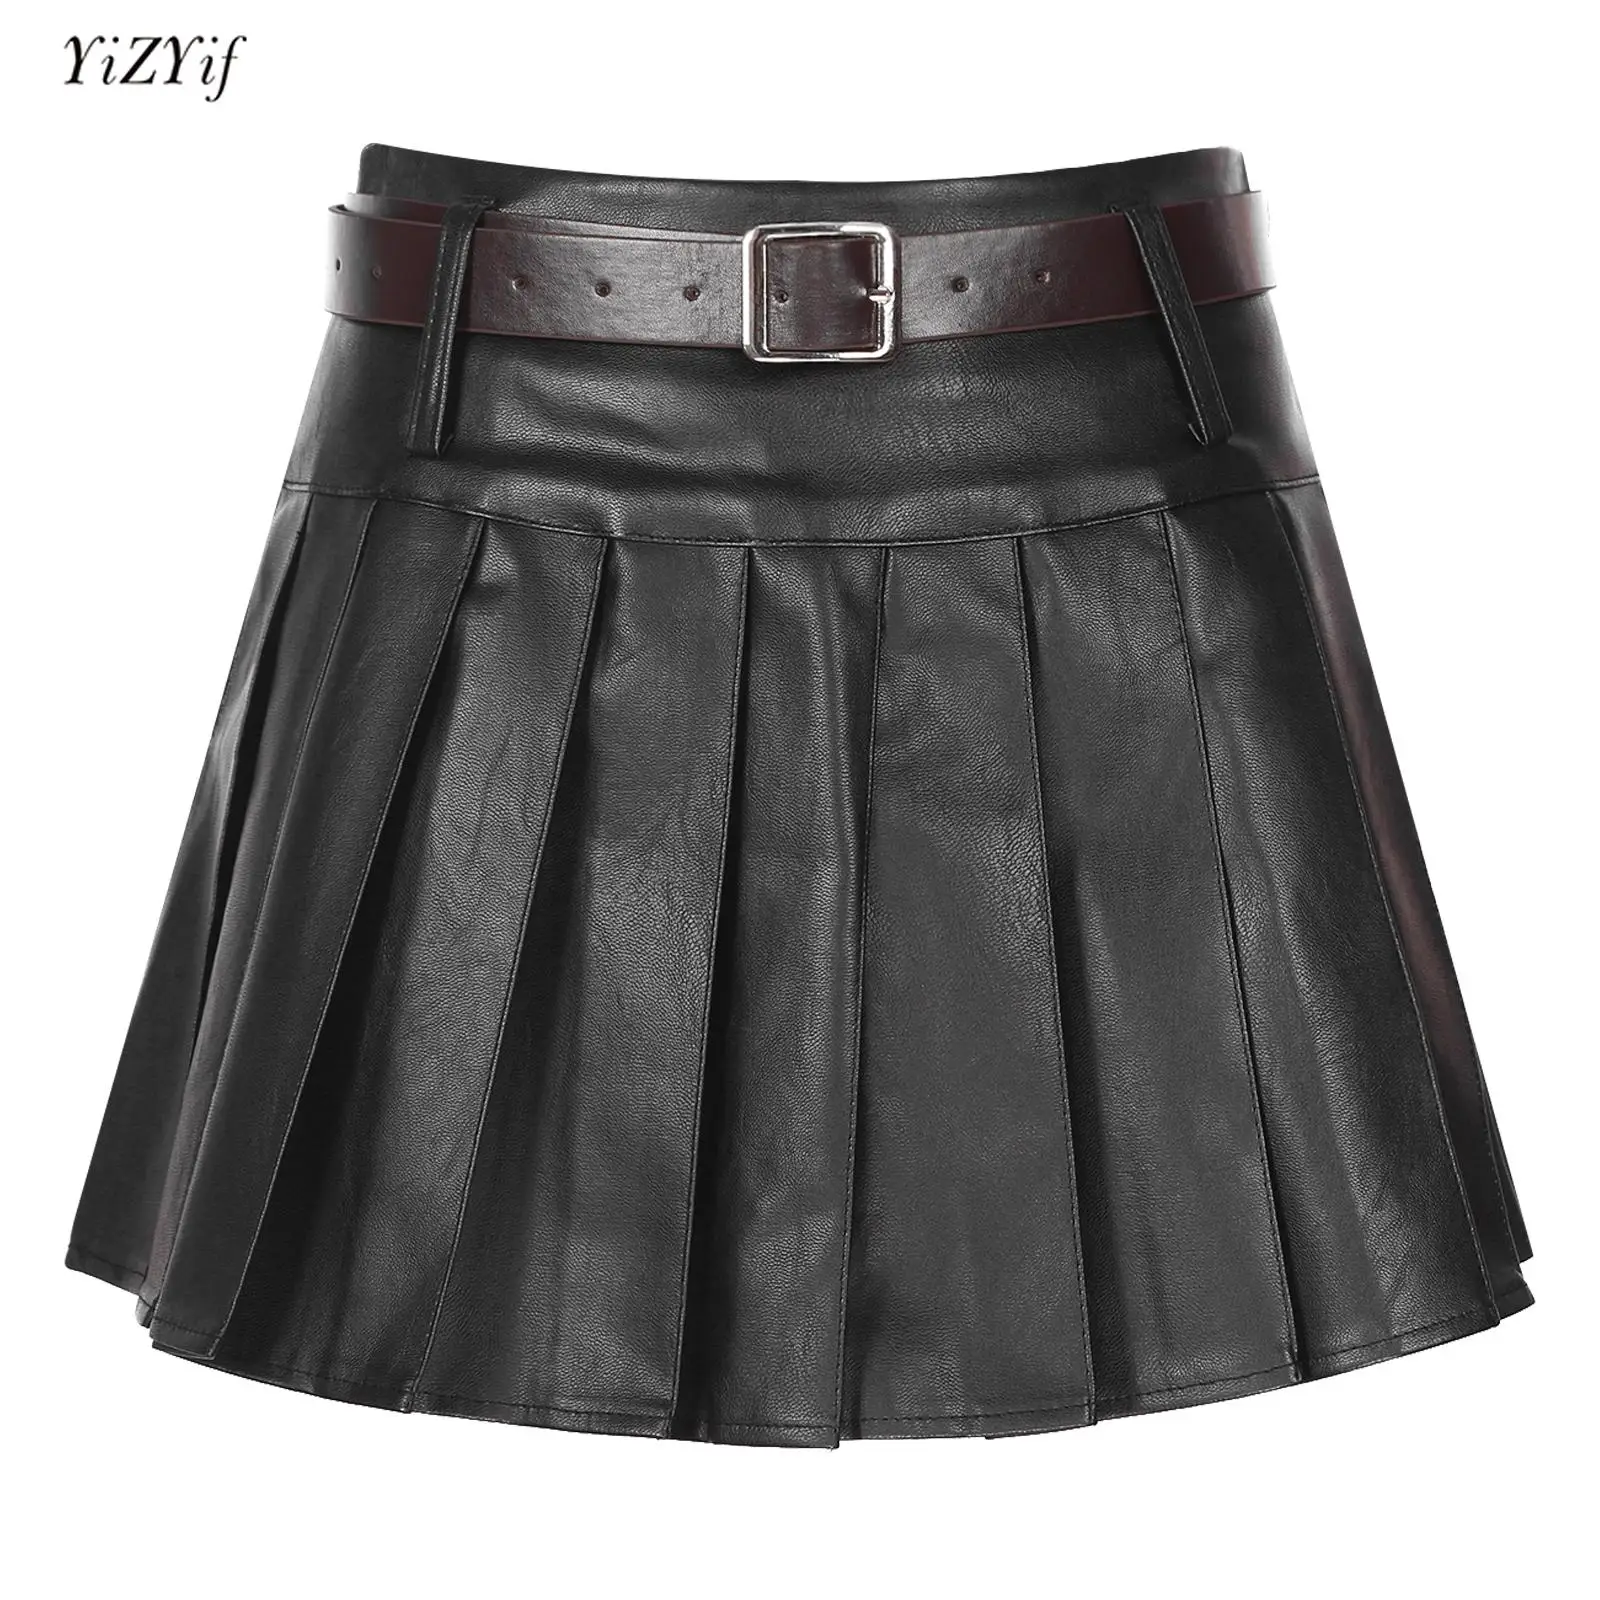 Womens Faux Leather Pleated Skirt Fashion Clubwear High Waist Built-in Shorts Skirts with Adjustable Belt Party Street Dancewear short coat top women s new autumn high street made old imitation leather biker jacket back with zip korean reviews many clothes